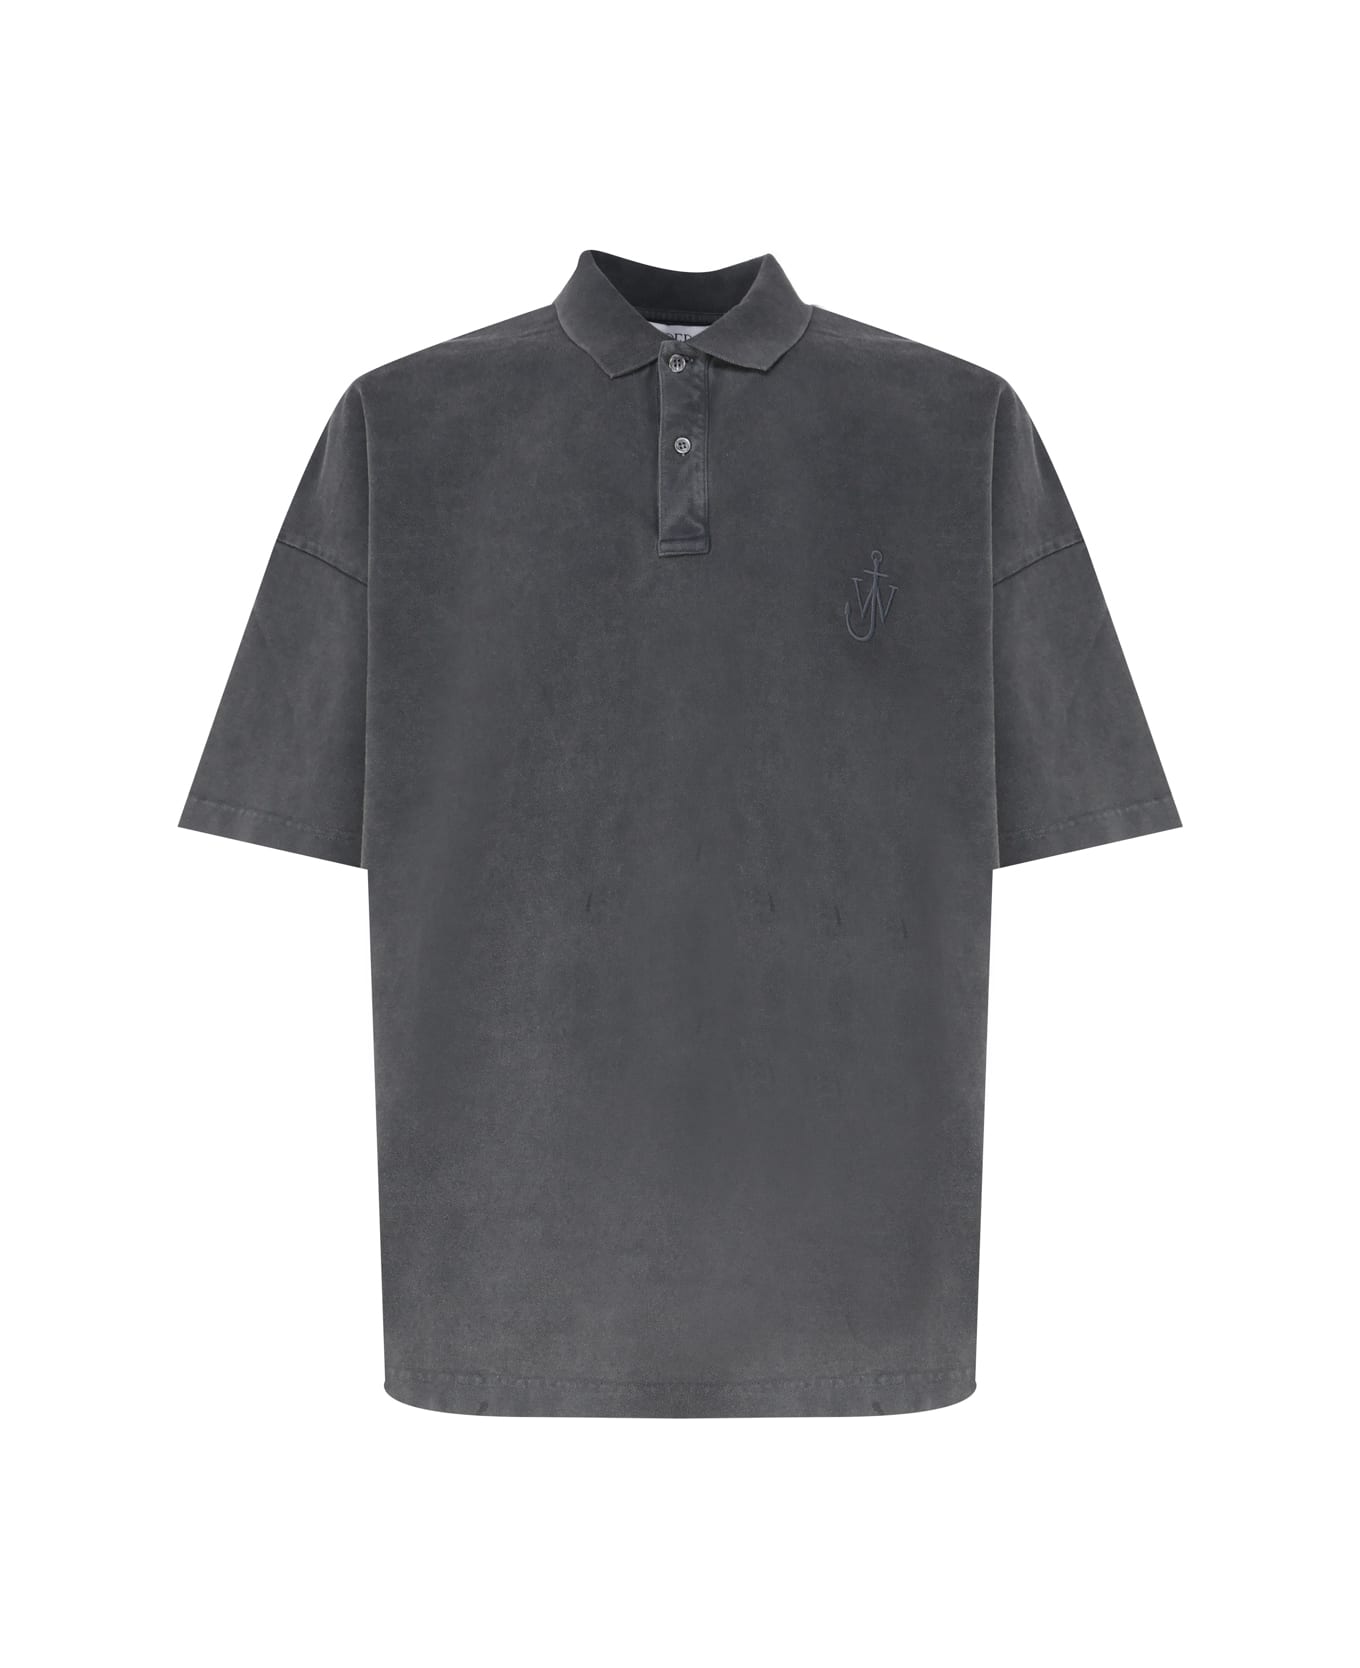 J.W. Anderson Polo Shirt With Embroidered Logo - Grey ポロシャツ